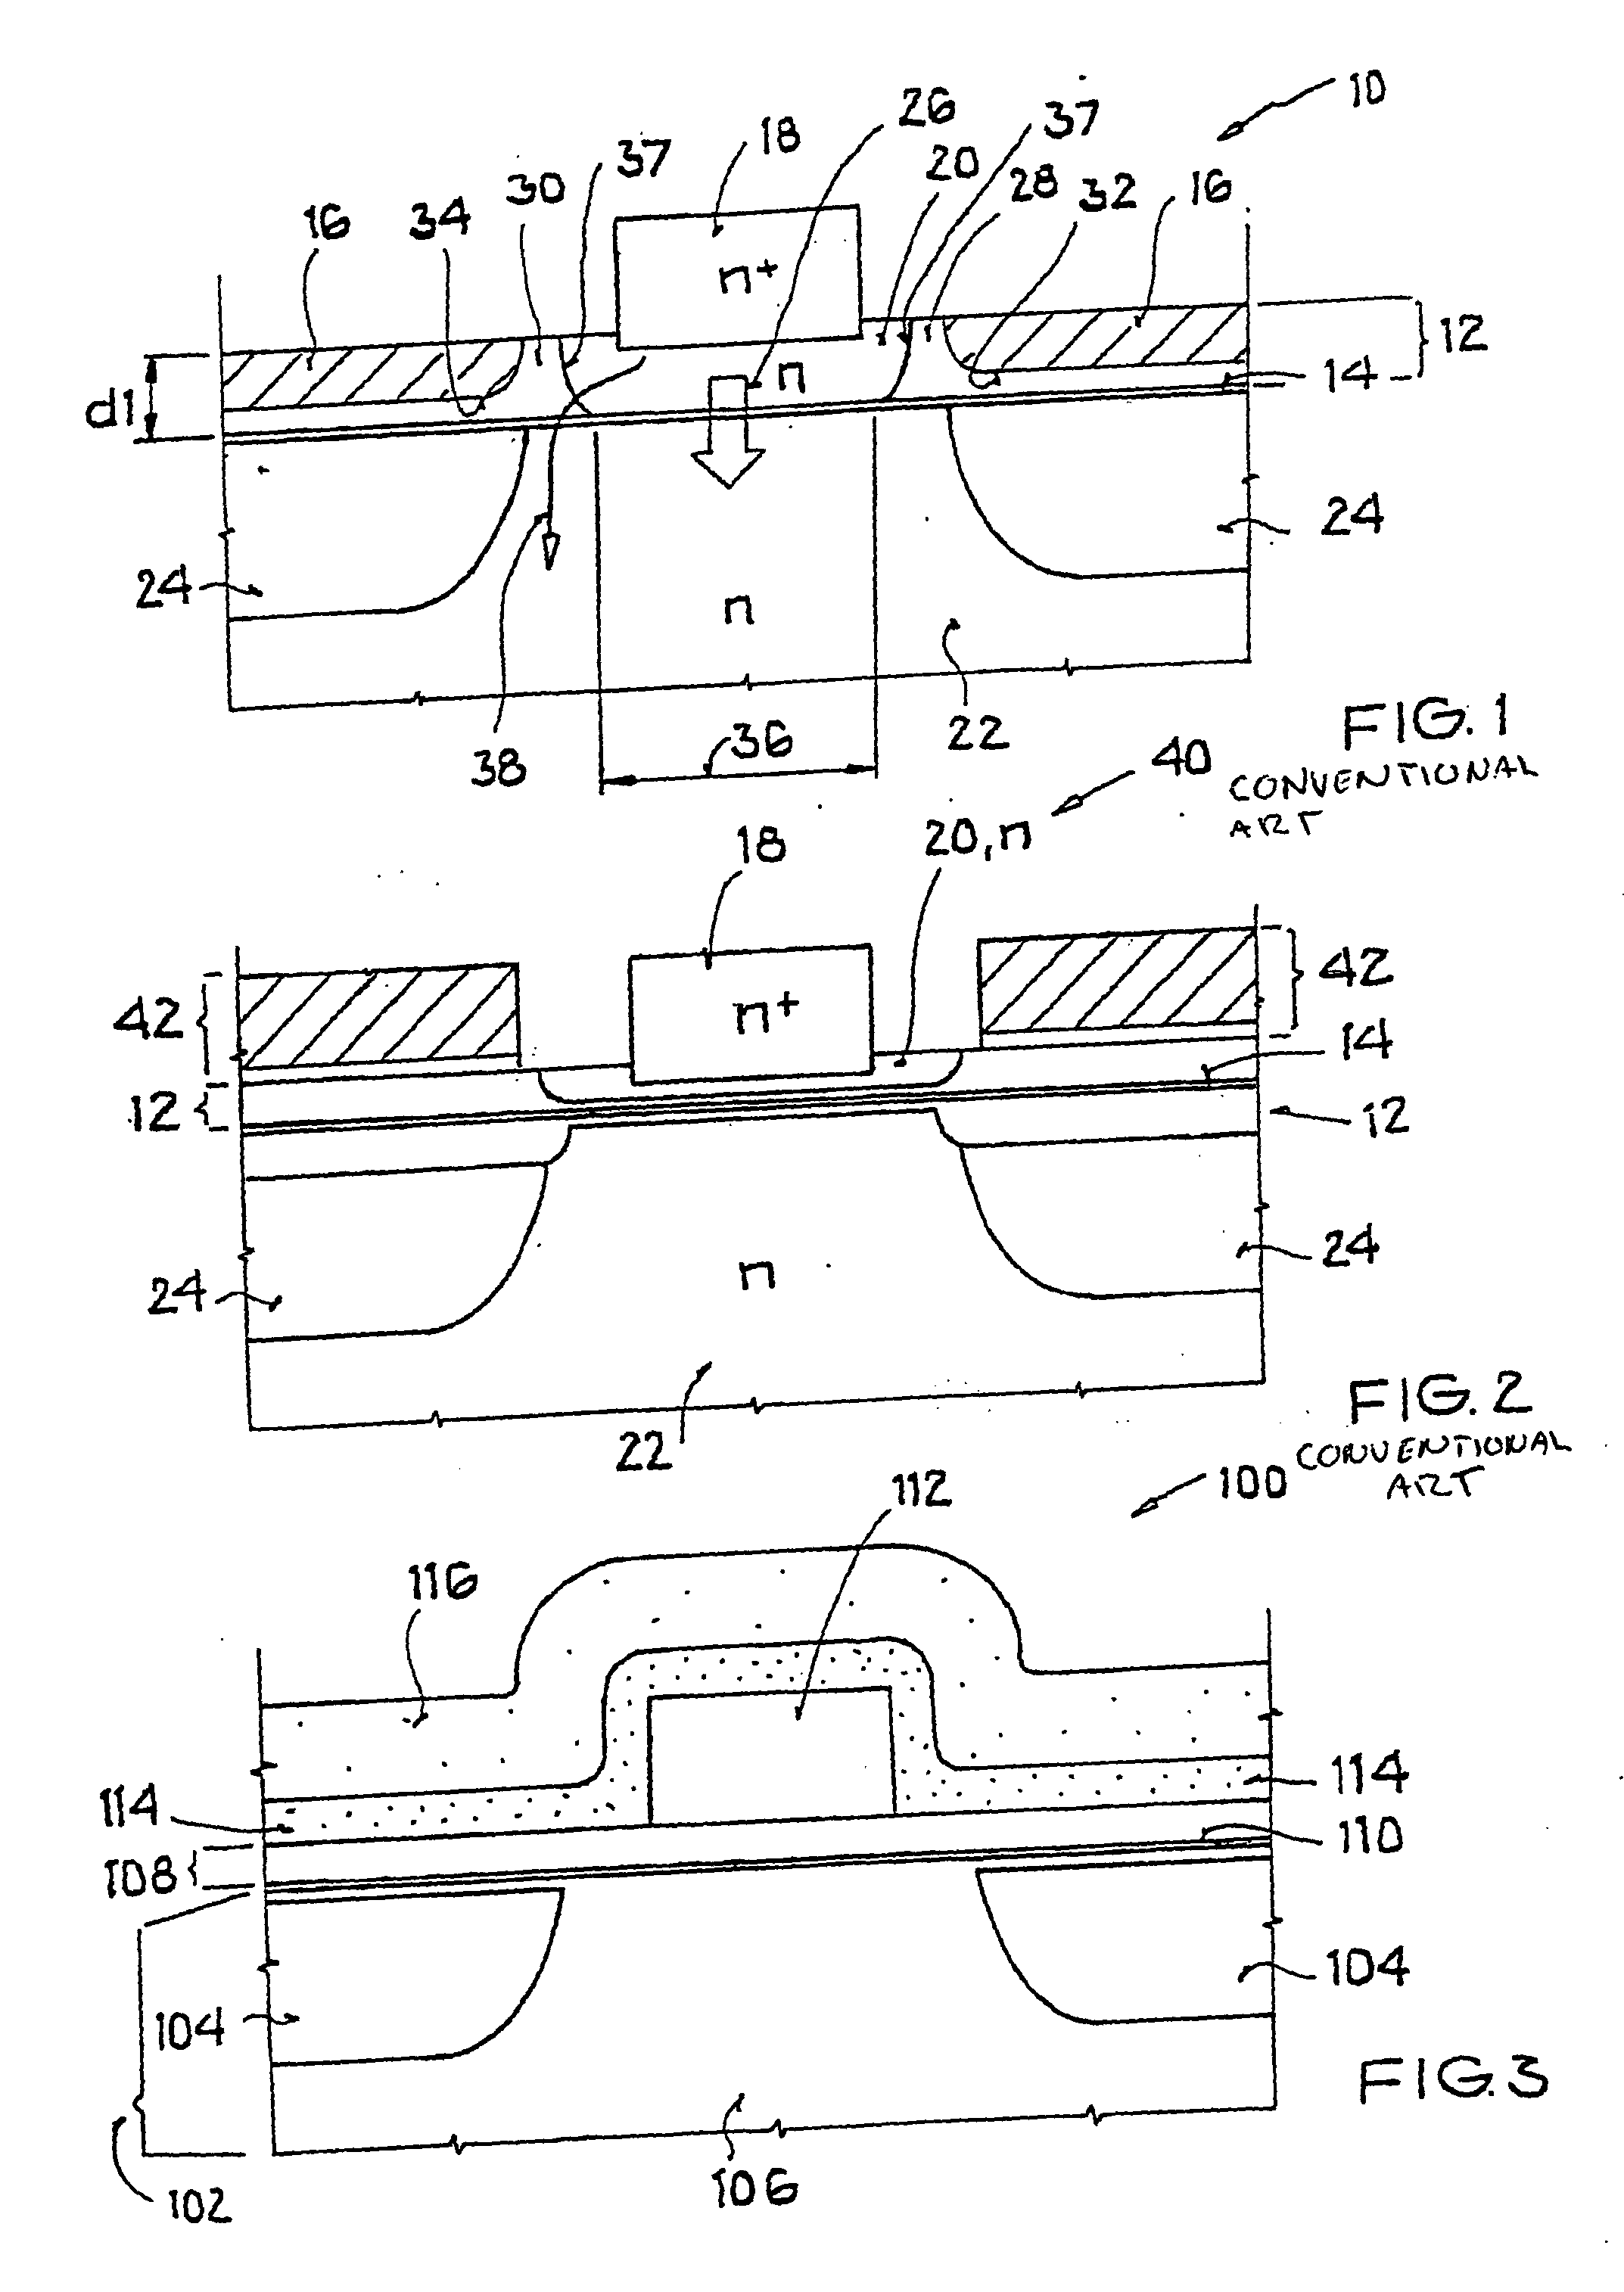 Process for producing a base connection of a bipolar transistor